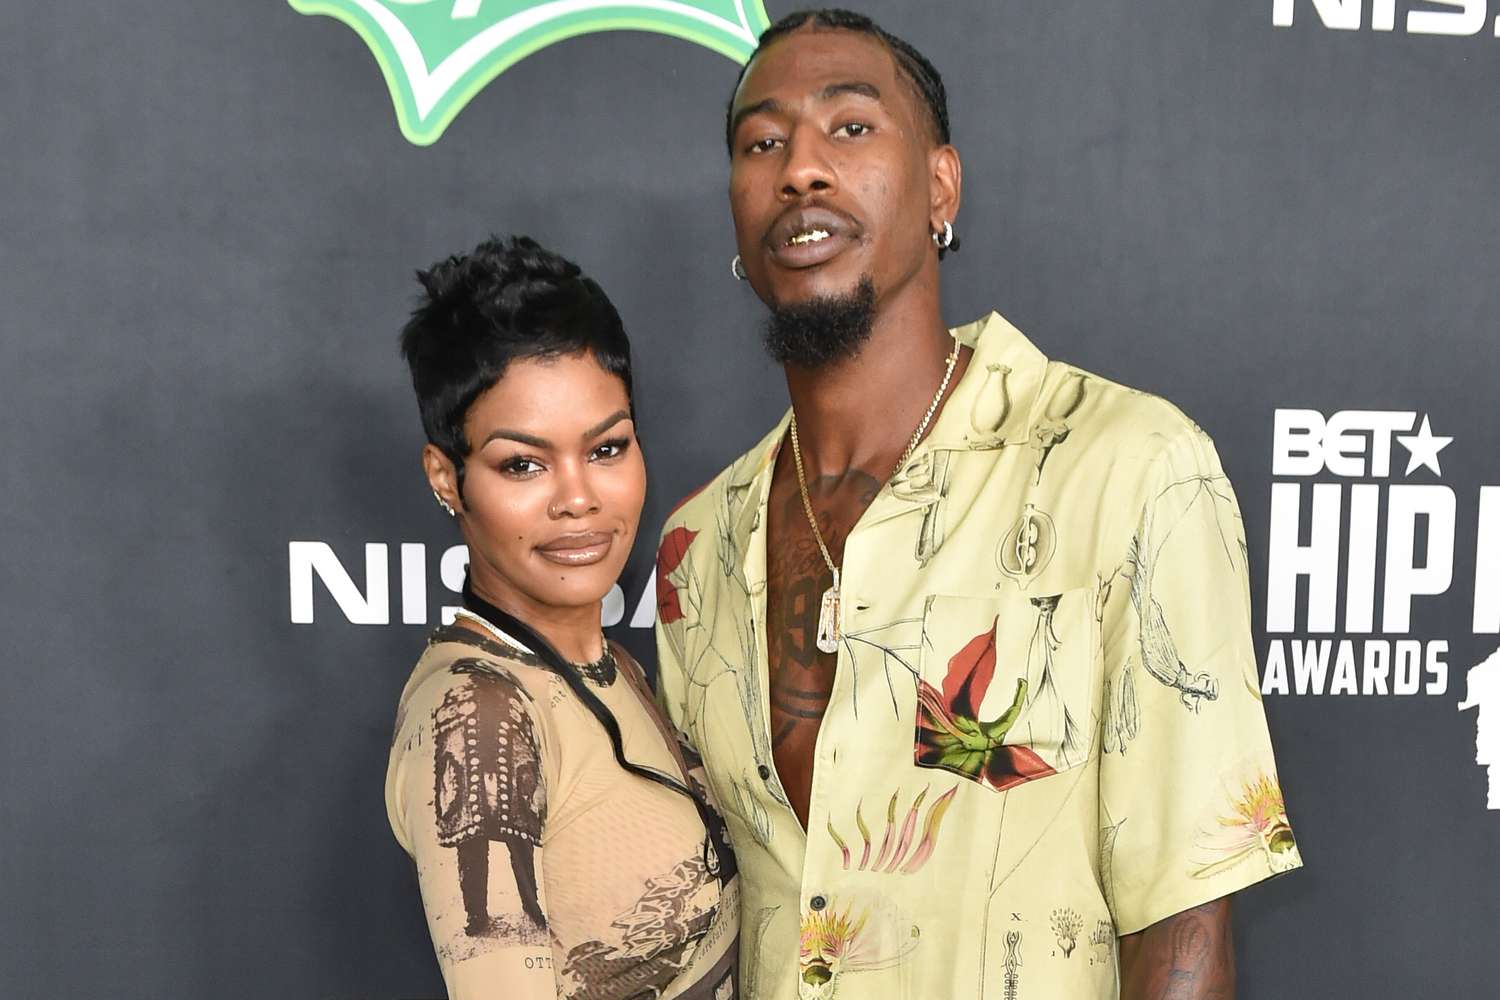 Iman Shumpert Reveals Teyana Taylor Makes Double His Income in Spousal Support Request